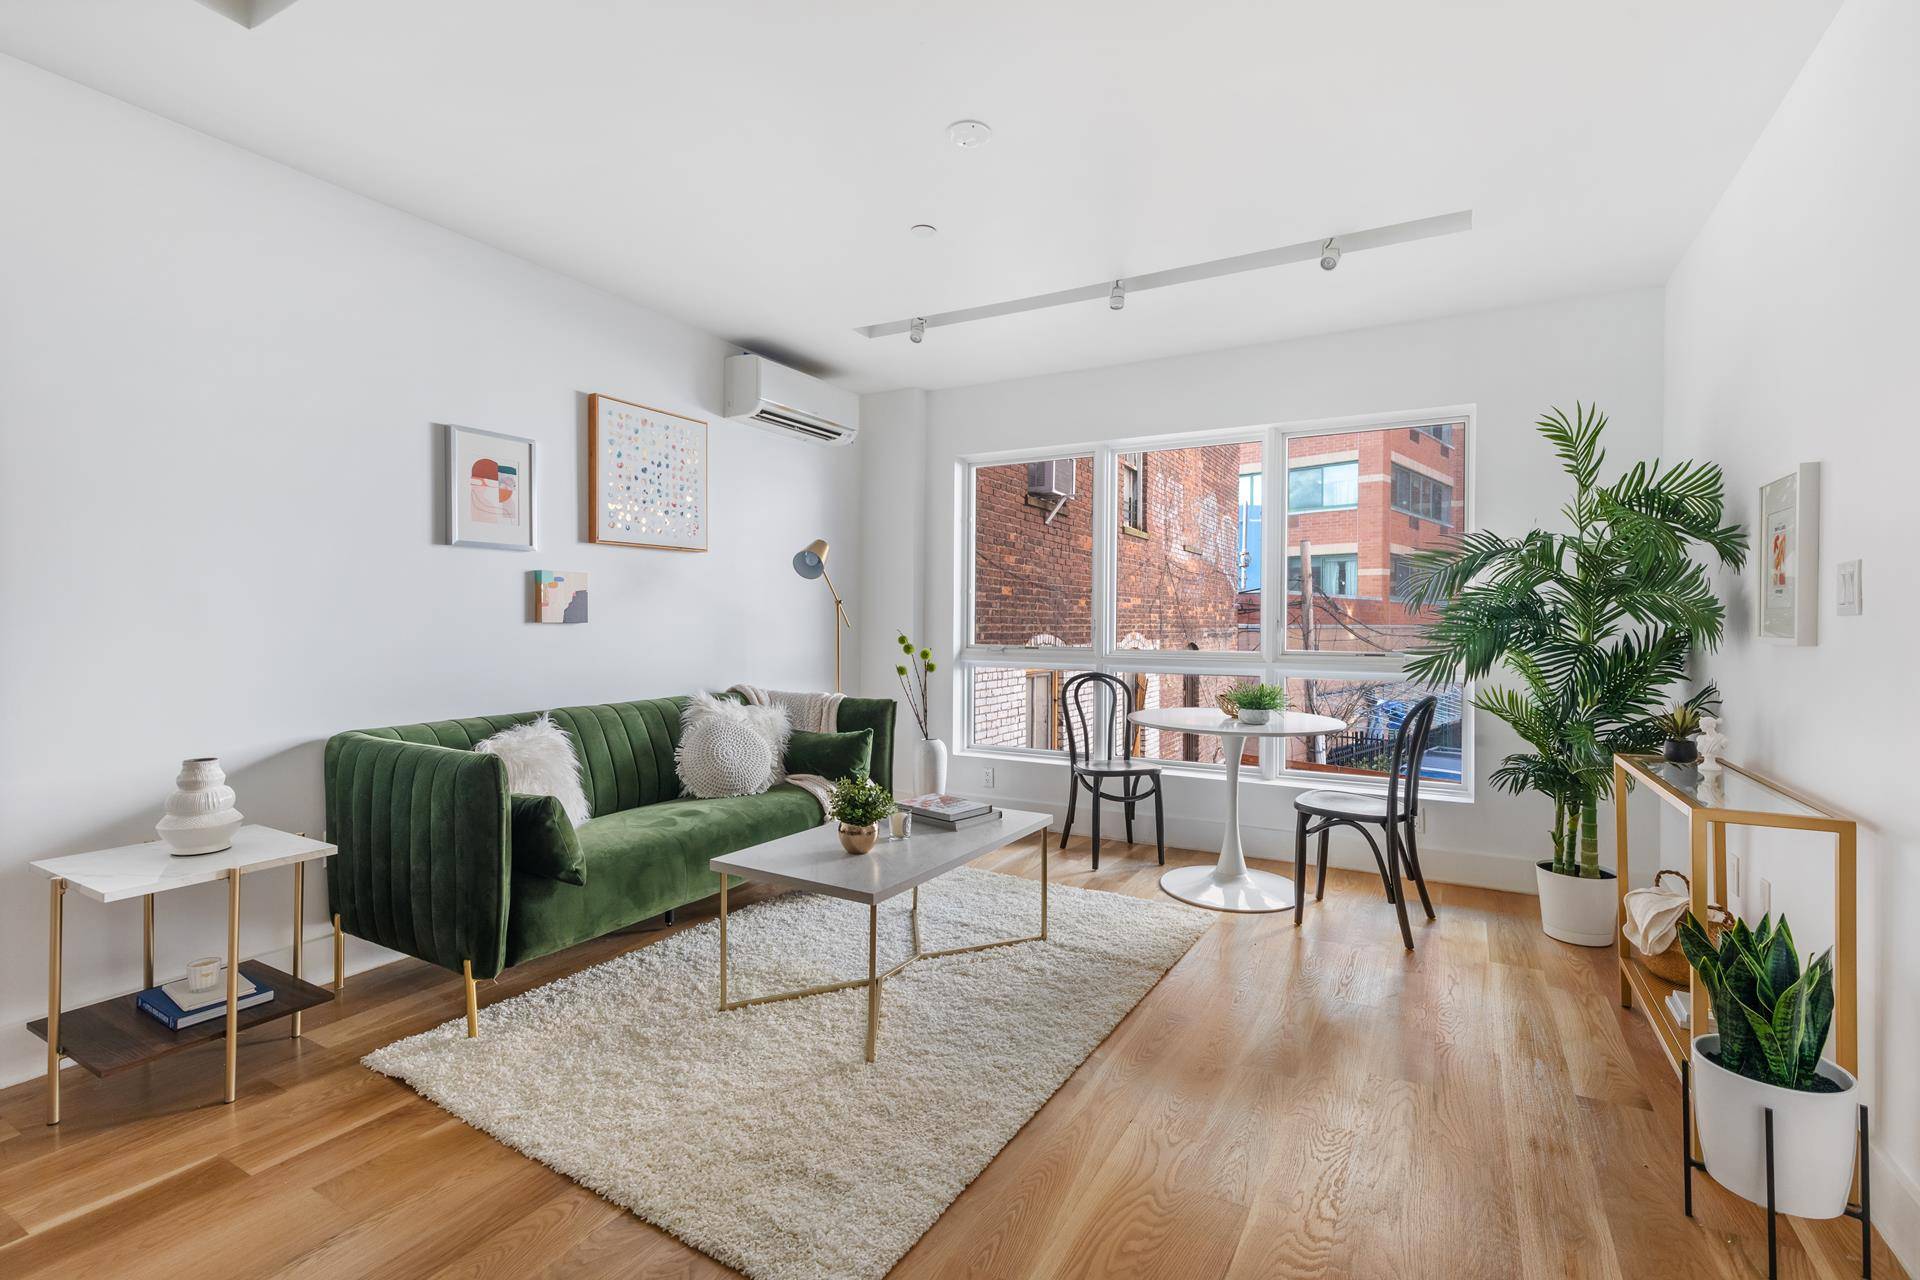 OPEN HOUSE BY APPOINTMENT ONLY WITH REQUIRED PRE REGISTRATION 1249 Dekalb Avenue is Bushwick's premier, boutique condominium that converges the art of minimalistic design and functionality.